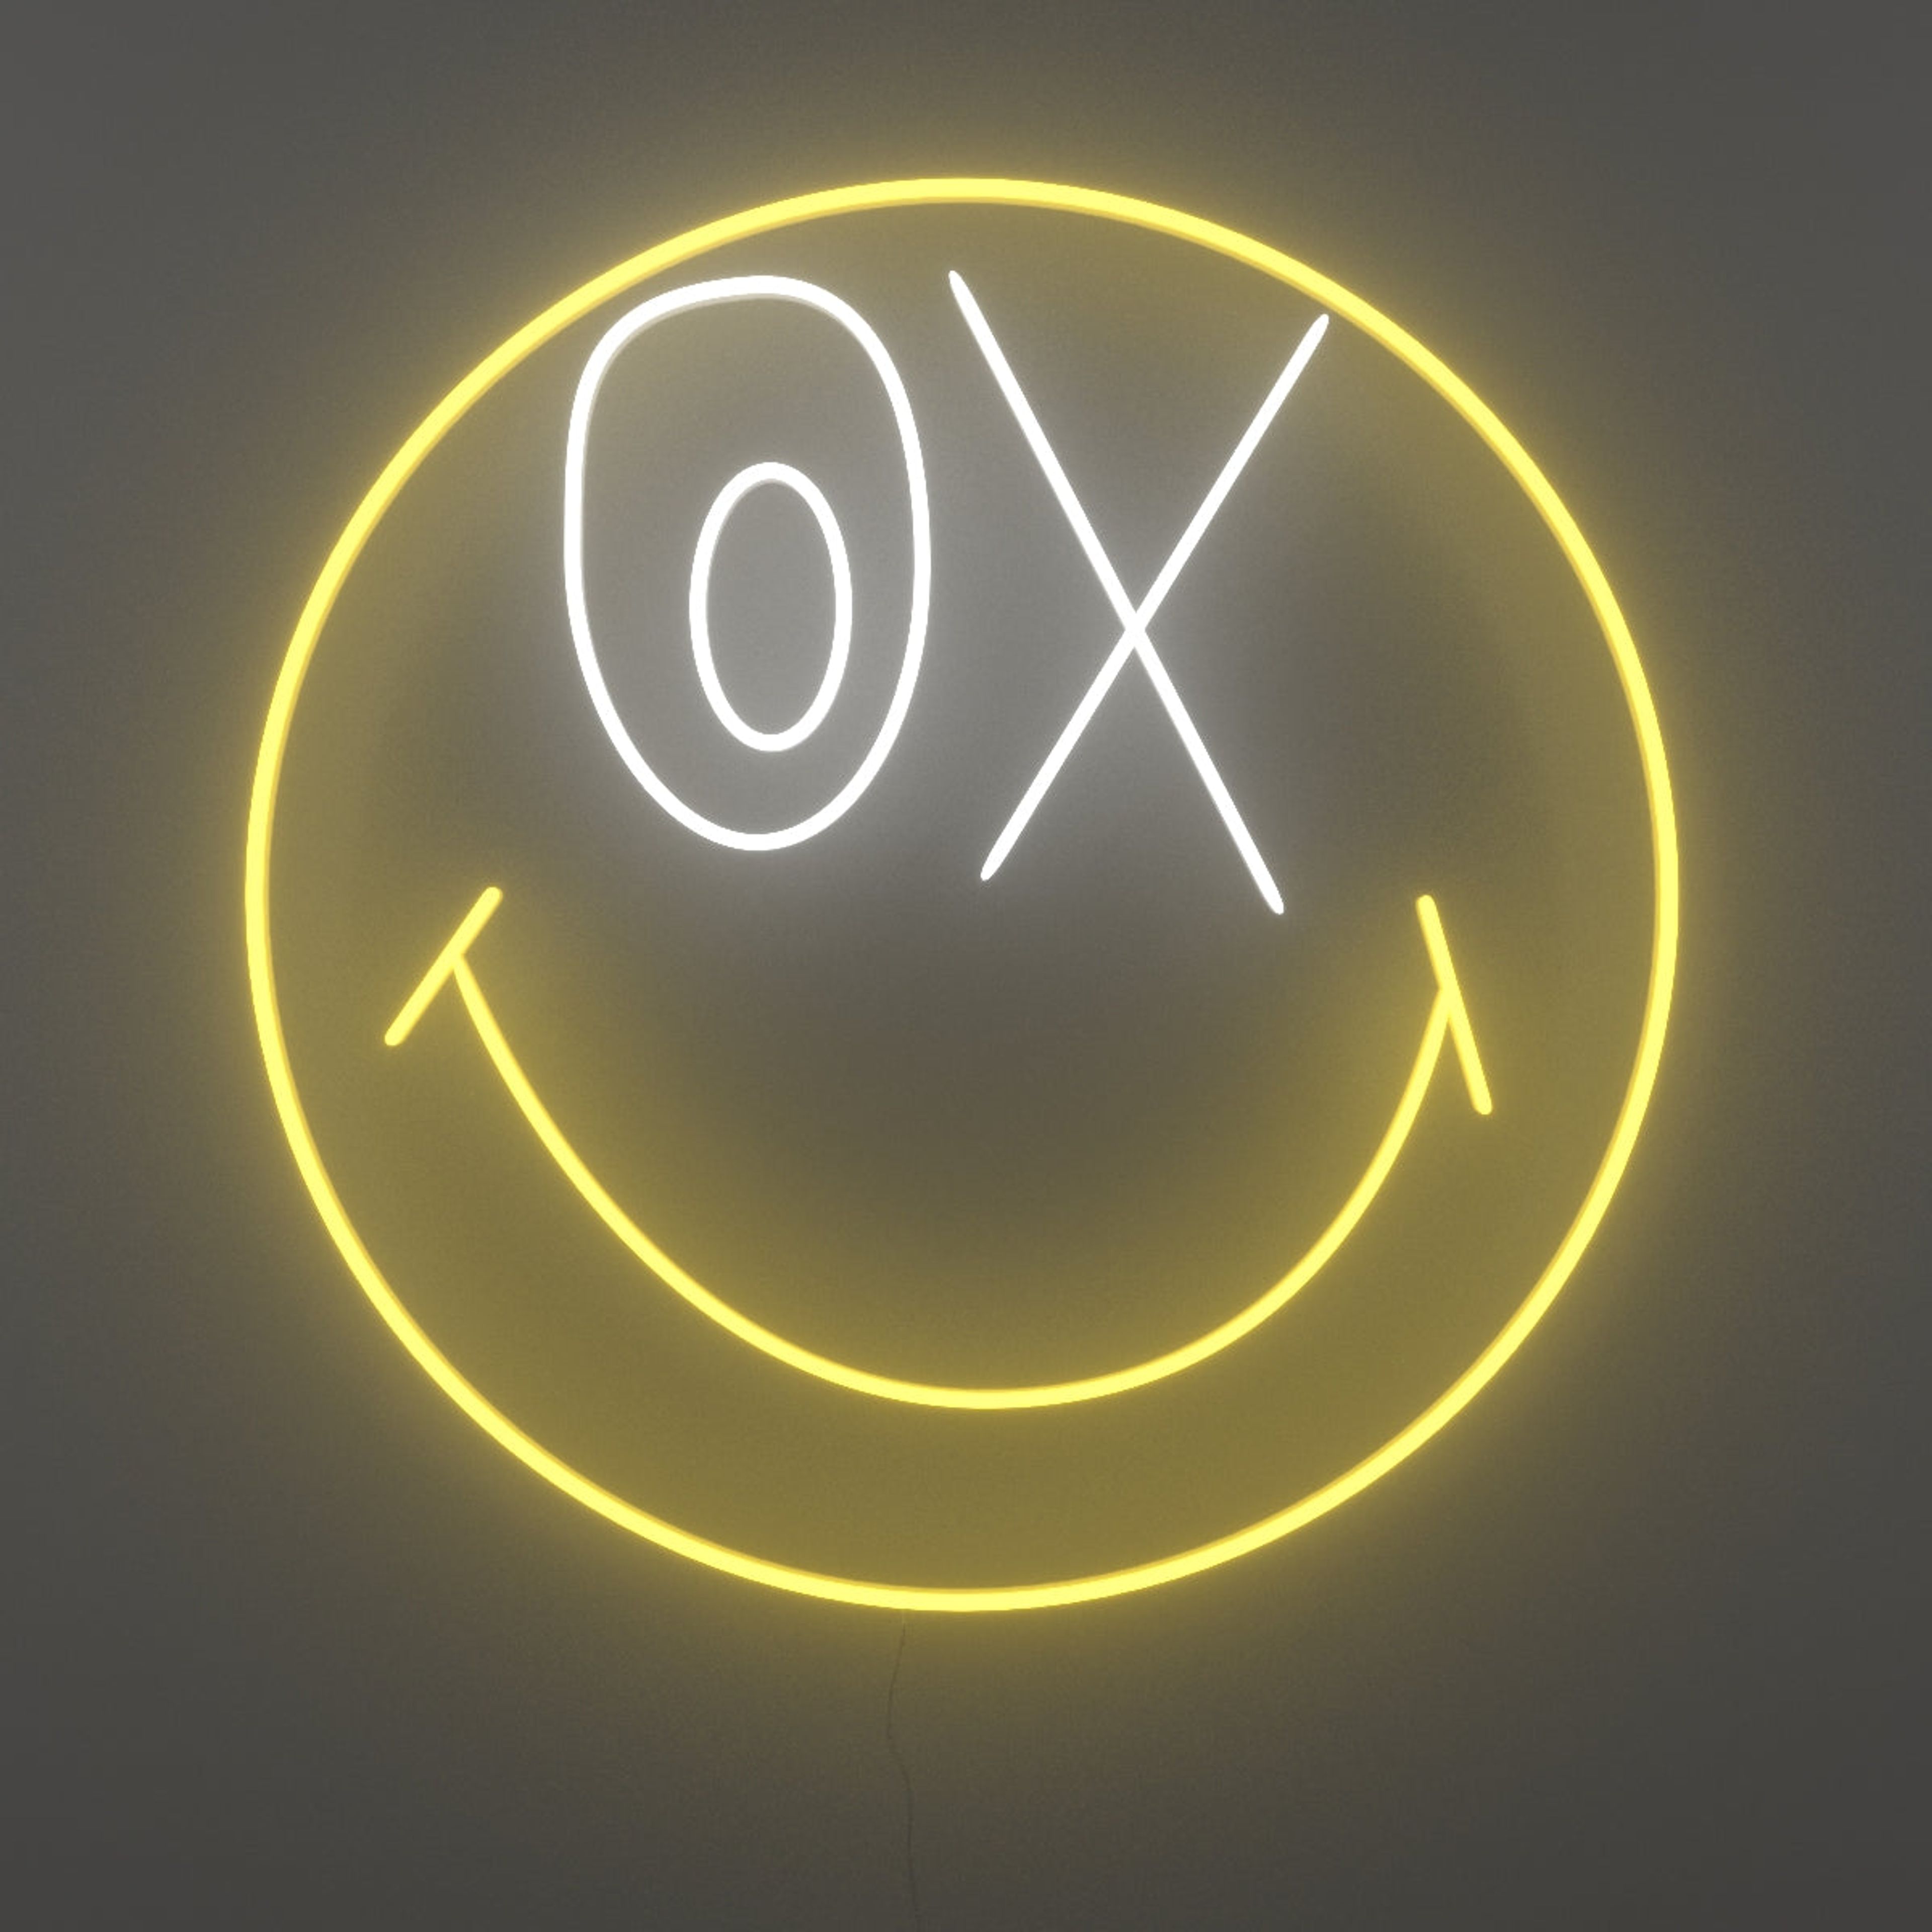 Smiley 50th Anniversary by André Saraiva, LED neon sign